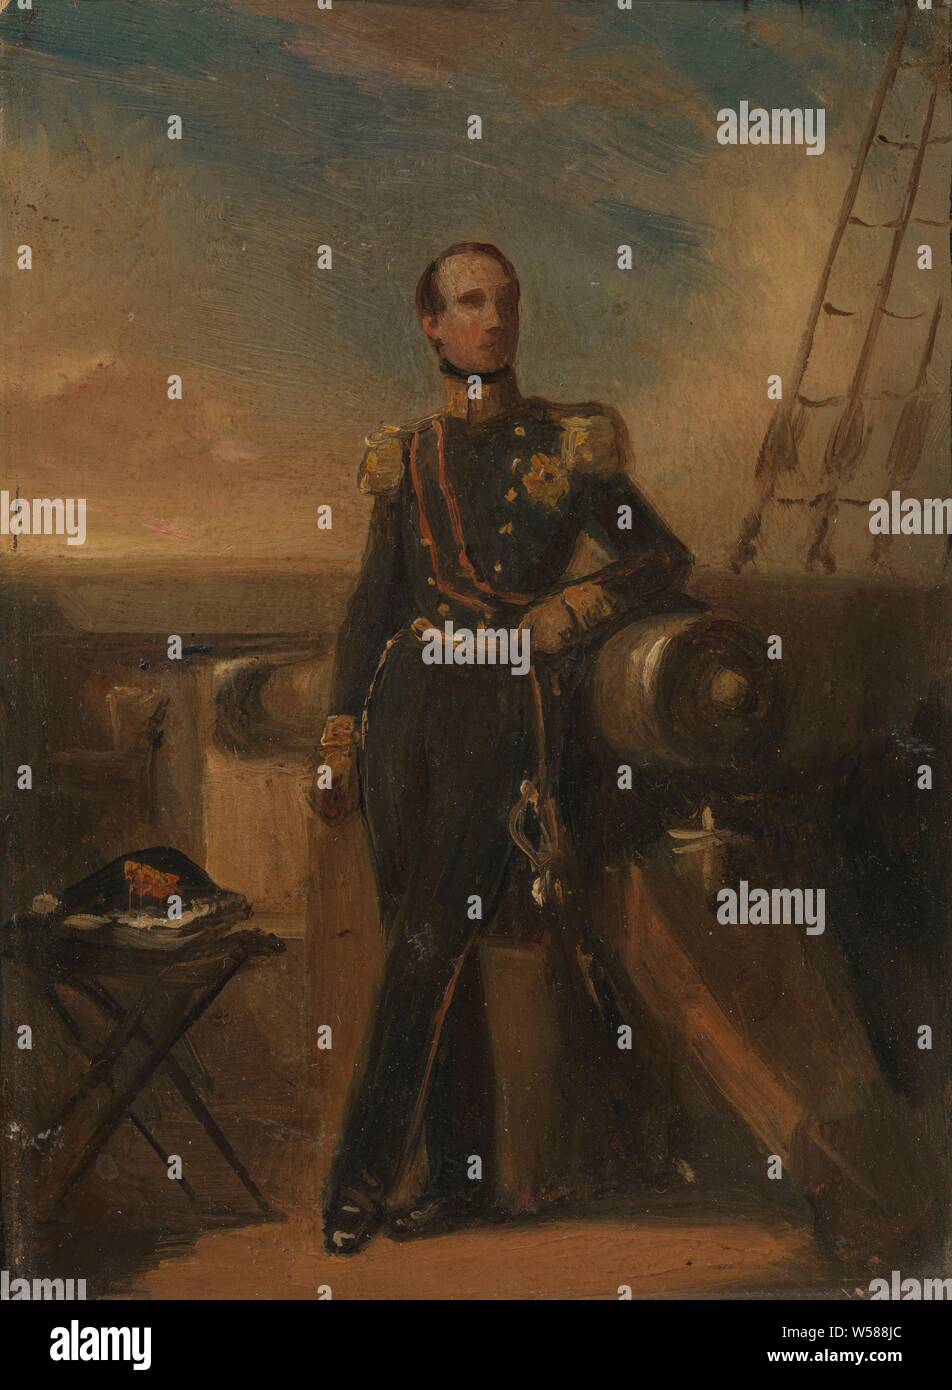 Portrait of Hendrik, Prince of the Netherlands, Portrait of Willem Frederik Hendrik (1820-1879), known as Prince Hendrik. Standing full-length, on deck of a ship, leaning against the barrel of a cannon. Portrayed in admiral uniform, his stitch is on the left side of a table. Sketch for the life-size portrait in Soestdijk Palace, historical persons, troop movements, transportation, commander-in-chief, admiral, Hendrik (Prince of the Netherlands), Nicolaas Pieneman, Netherlands, 1840 - 1850, panel, oil paint (paint), h 15 cm × w 11.5 cm h 28.6 cm × w 24.5 cm × d 3.2 cm Stock Photo